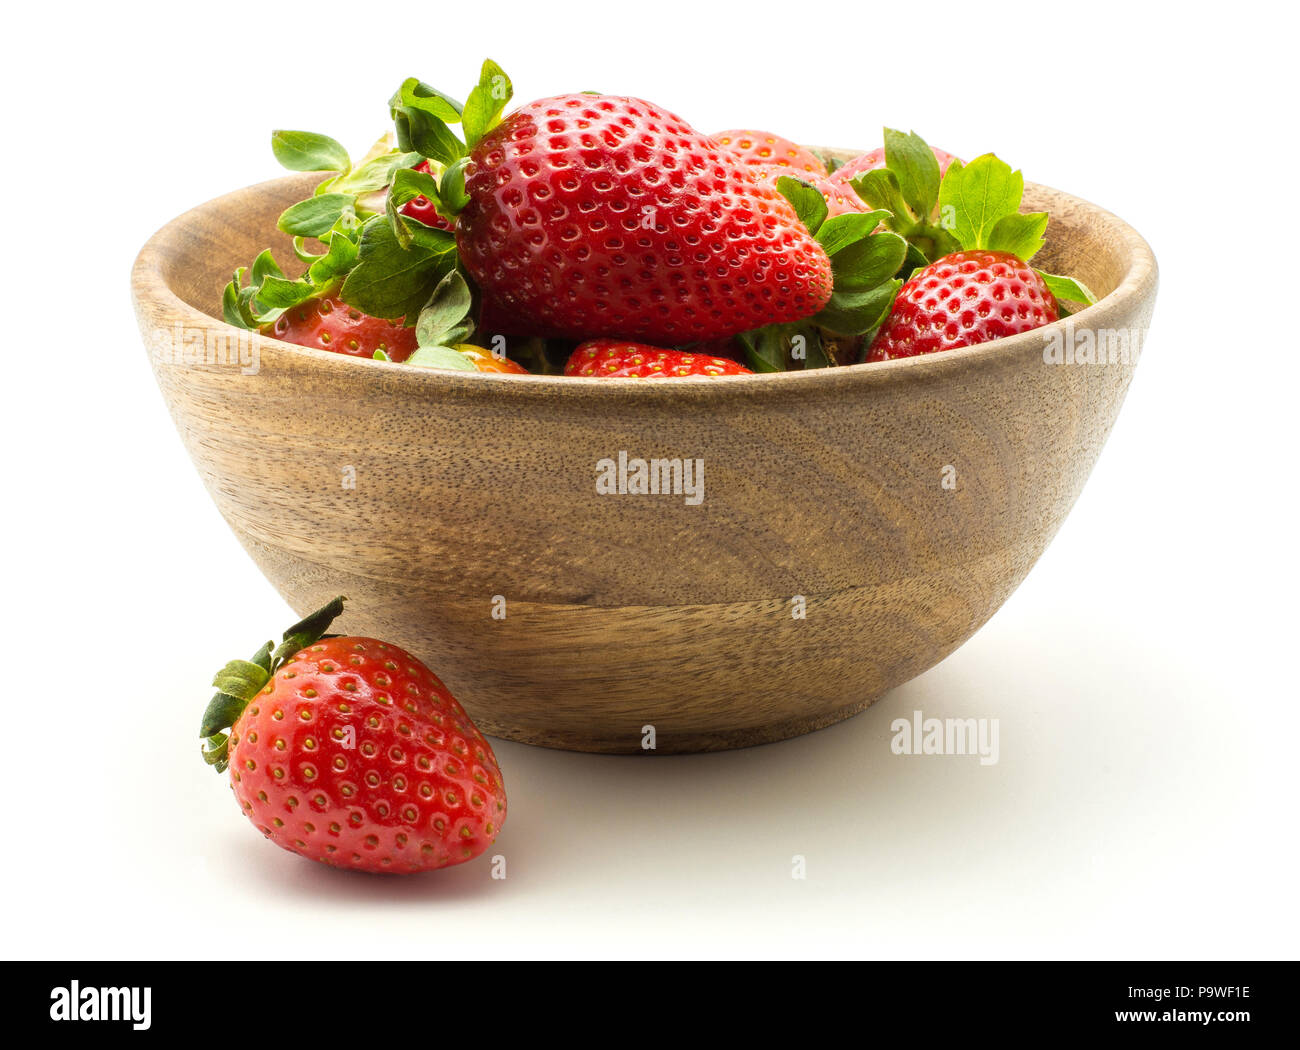 Fresh strawberries in a wooden bowl isolated on white background Stock Photo